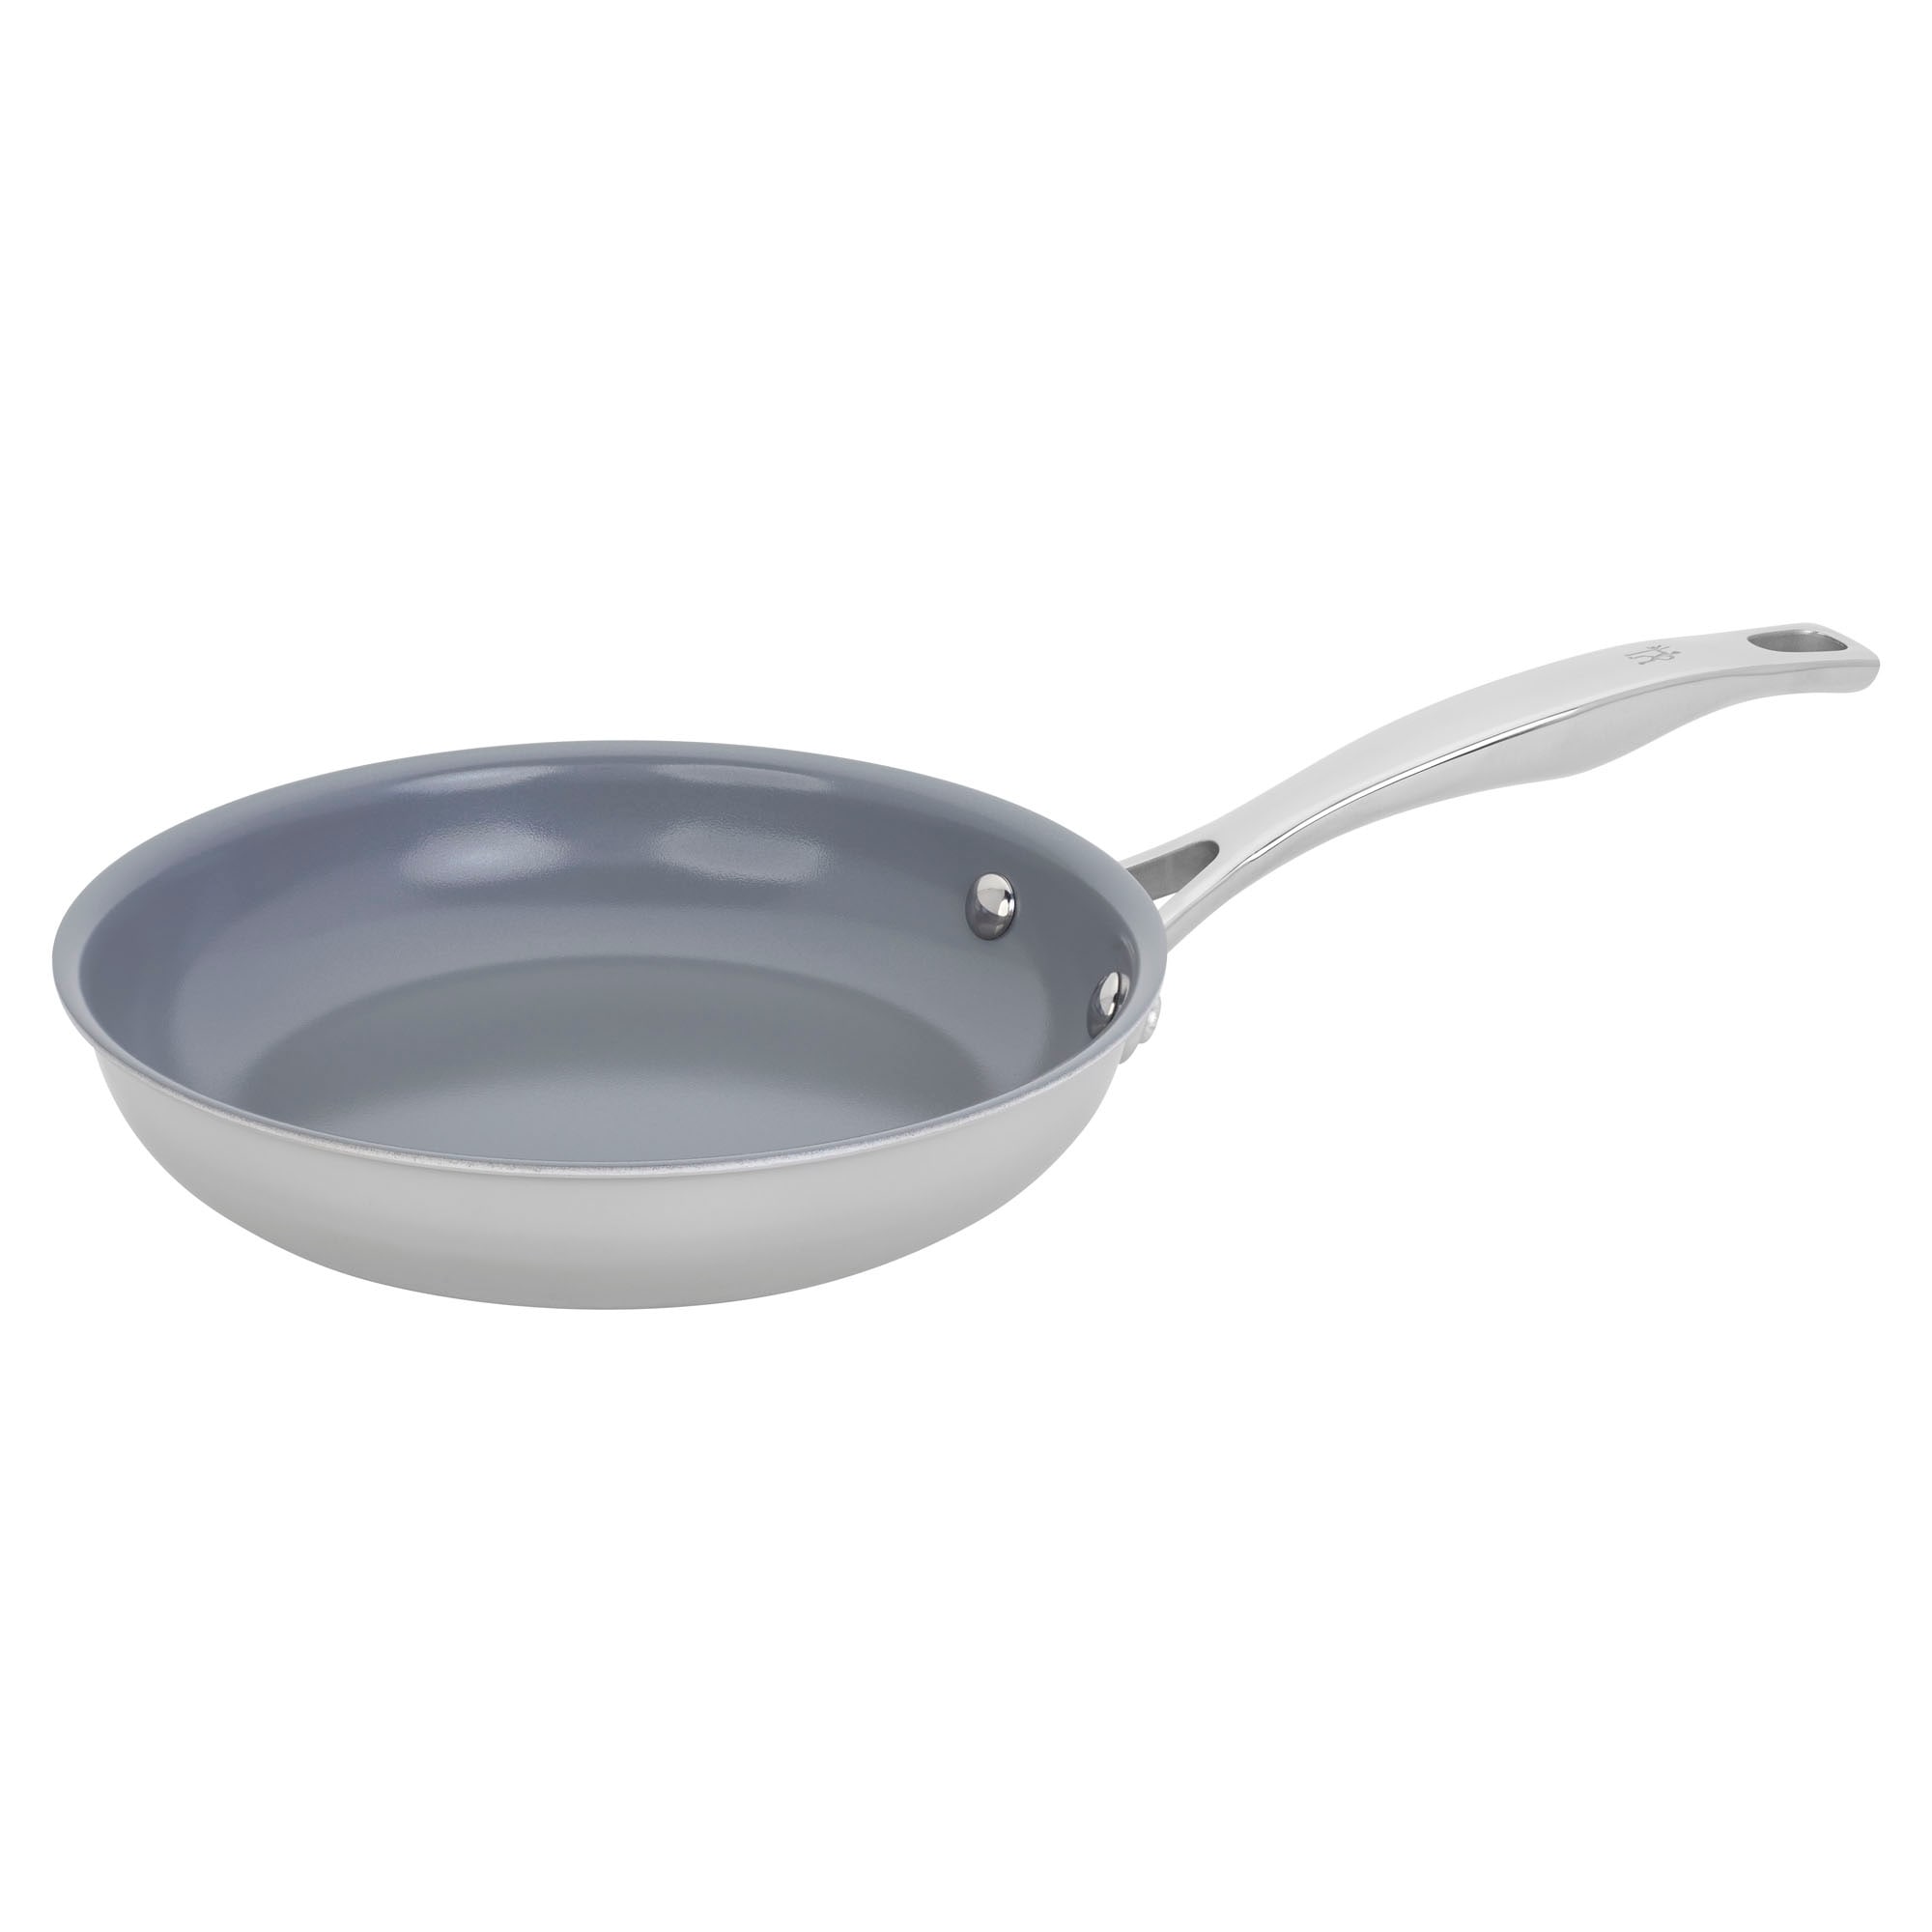 https://ak1.ostkcdn.com/images/products/is/images/direct/192788f83174337329e761141d314ac792d9e79e/Henckels-Clad-H3-8-inch-Stainless-Steel-Ceramic-Nonstick-Fry-Pan.jpg